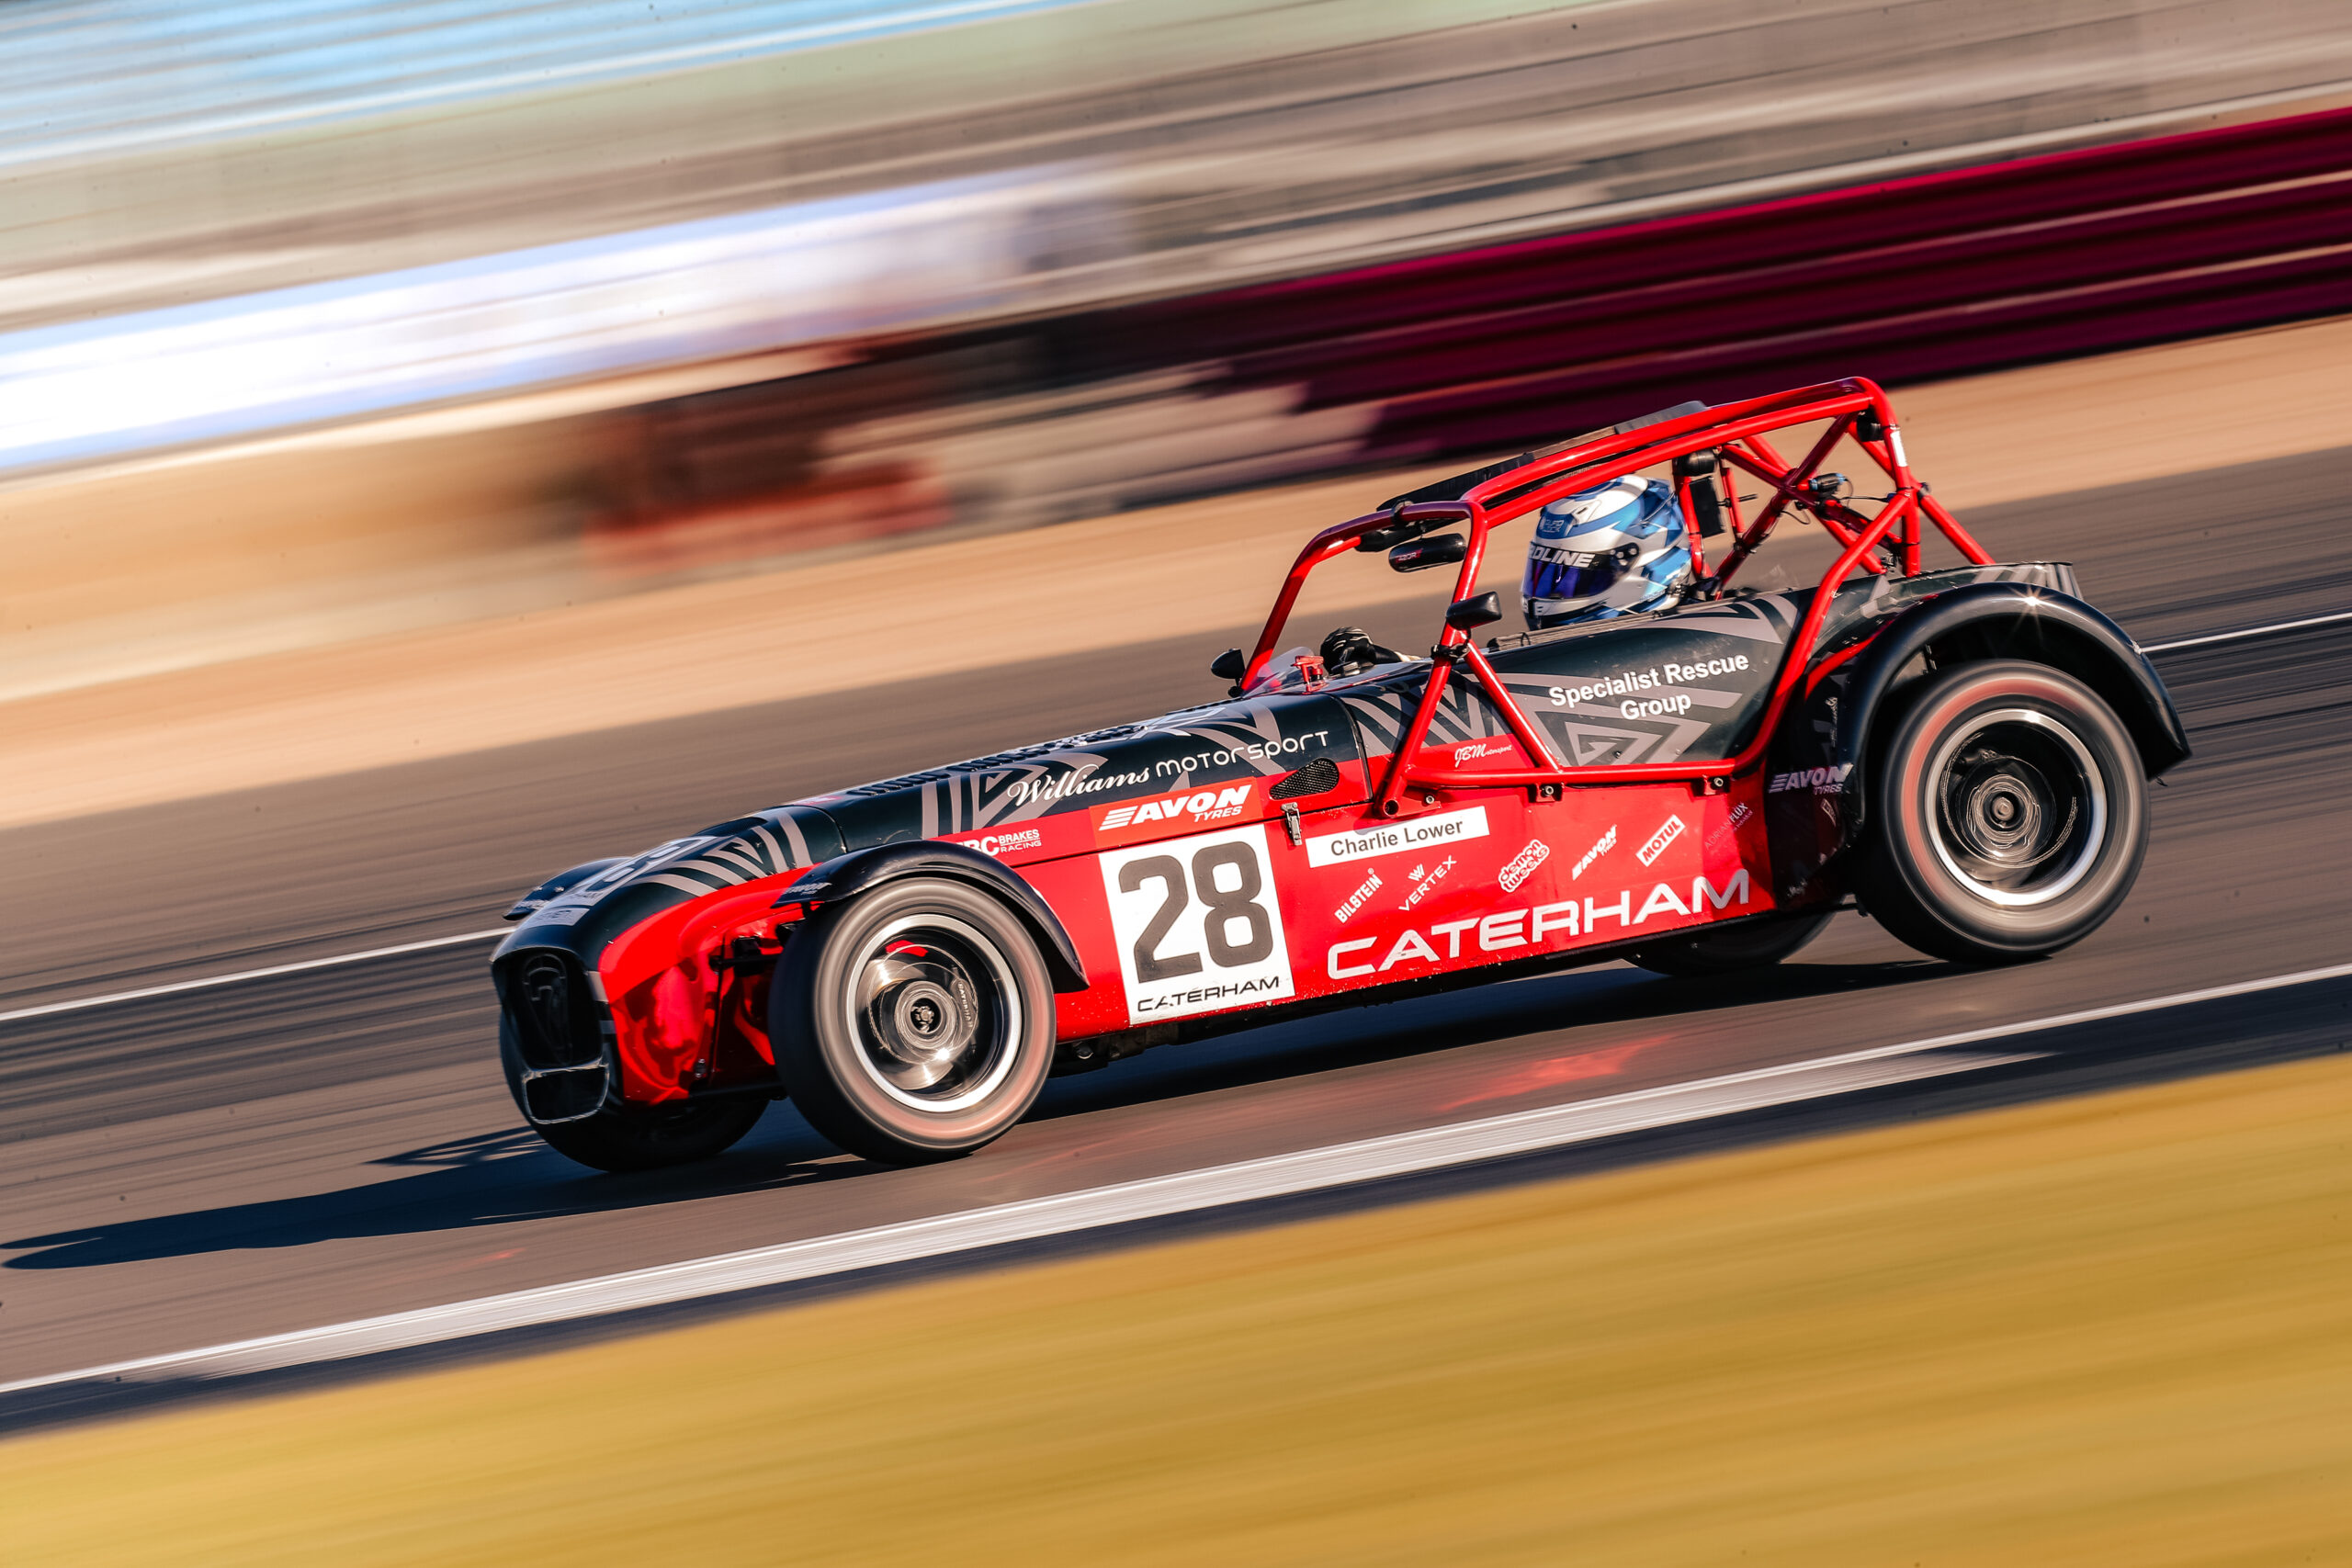 EBC-Equipped Caterham Racer Enters Formidable Guest Series at BTCC Race Weekend